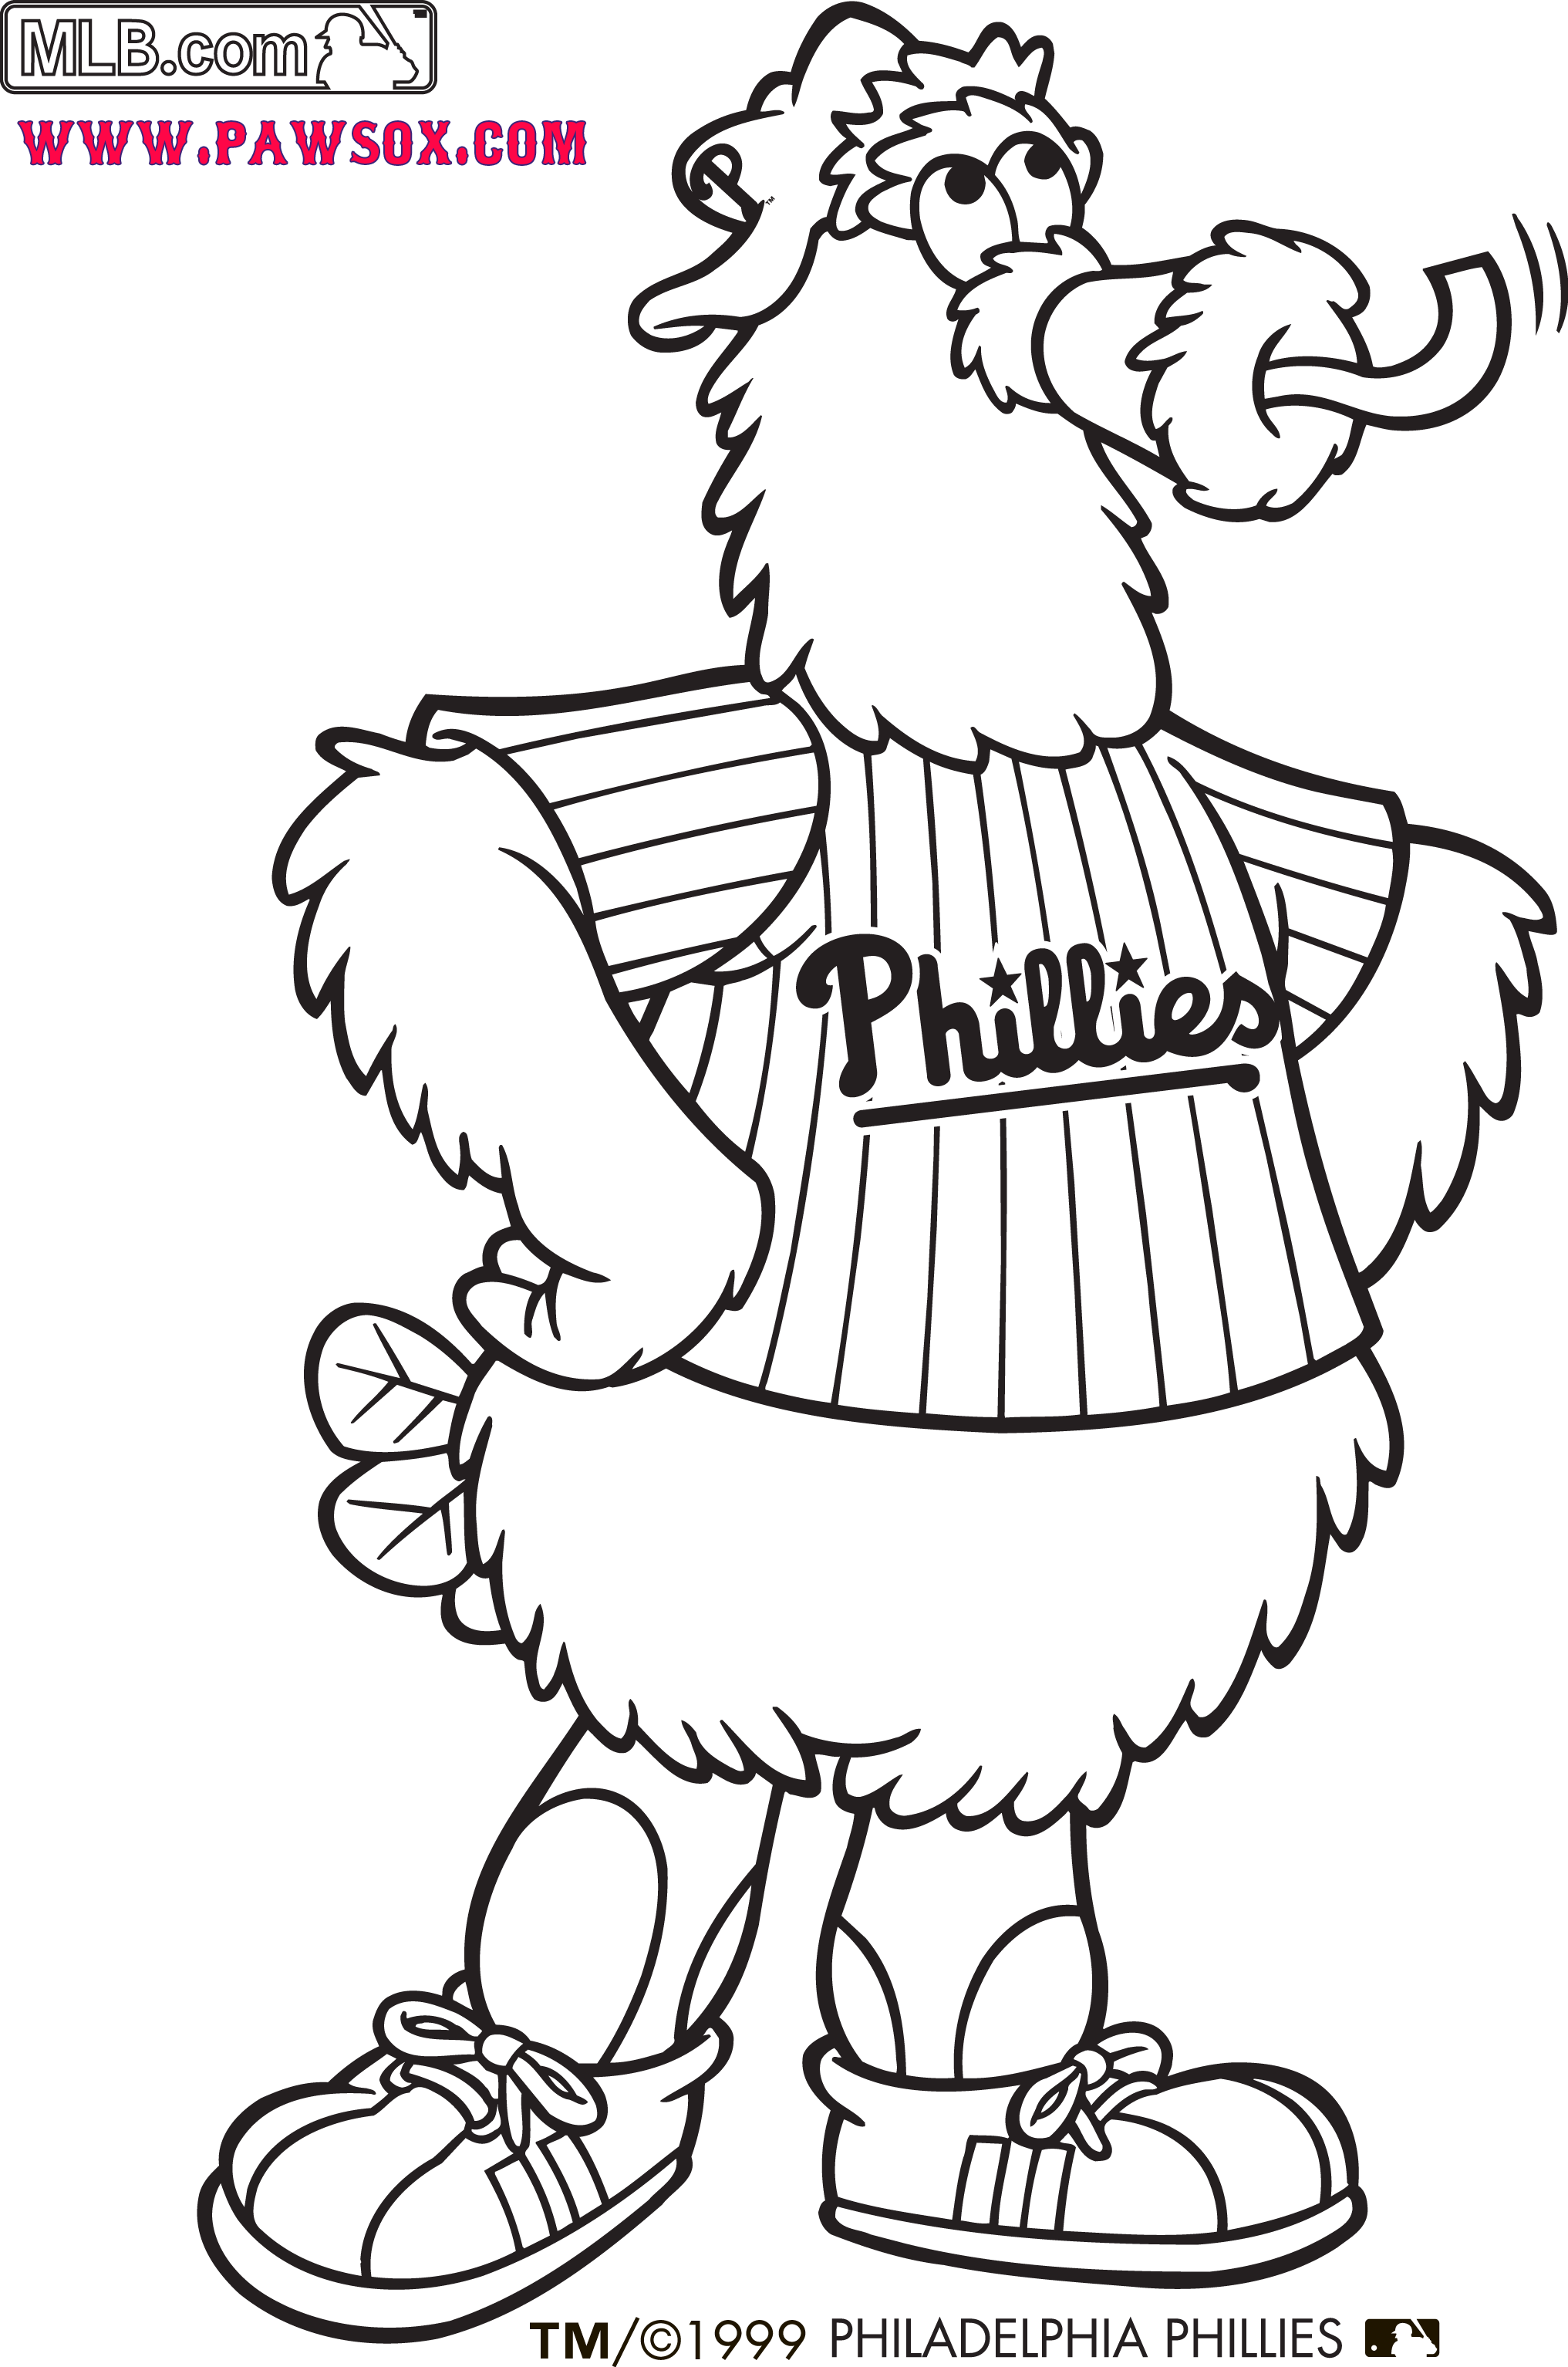 Philadelphia Phillies Phanatic Coloring Pages Sketch Coloring Page